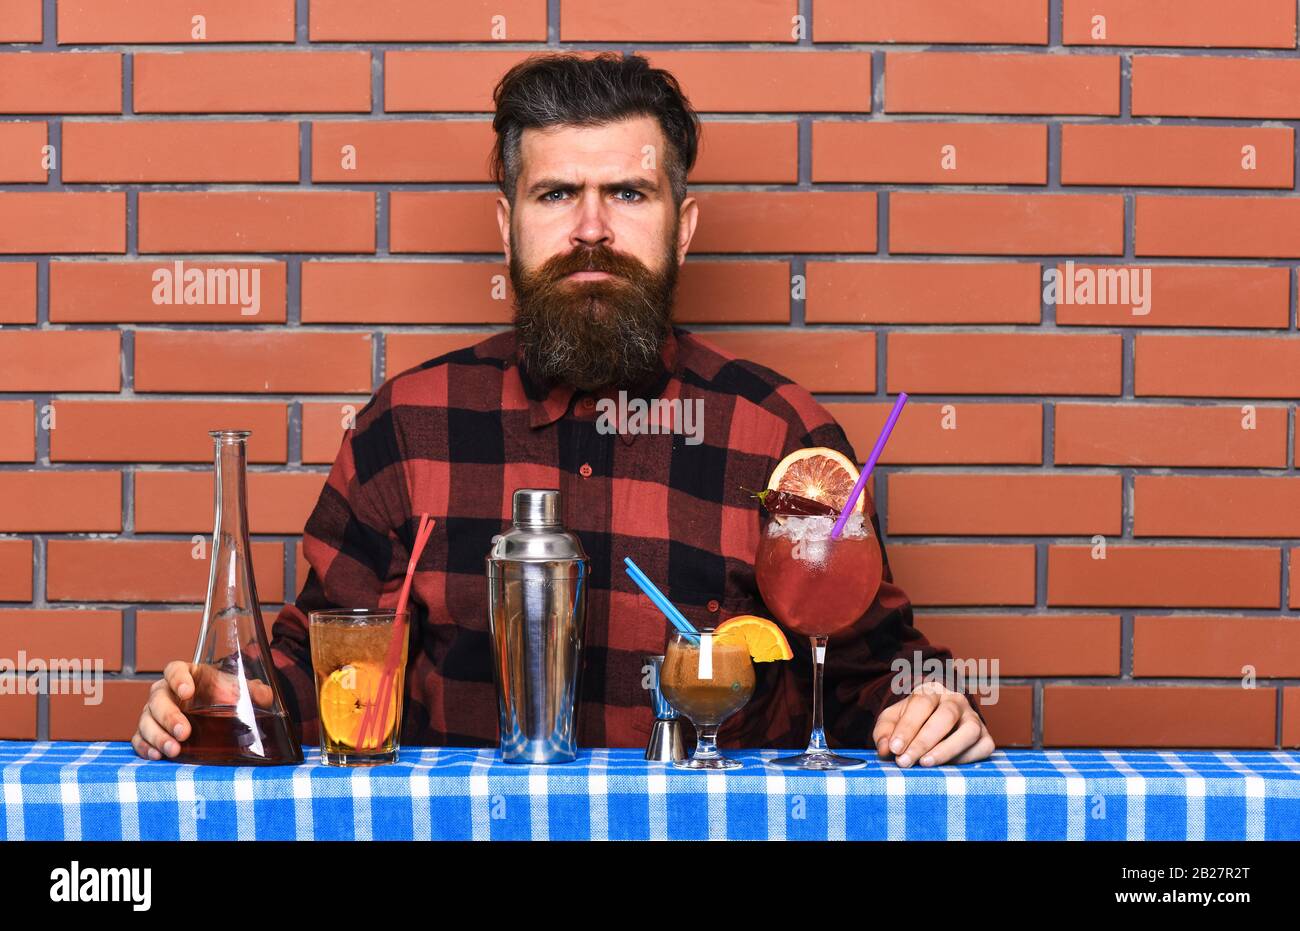 Man in checkered shirt on brick wall background prepares drinks. Barman with long beard and mustache and stylish hair on serious face made alcoholic cocktails. Alcoholic drinks concept Stock Photo